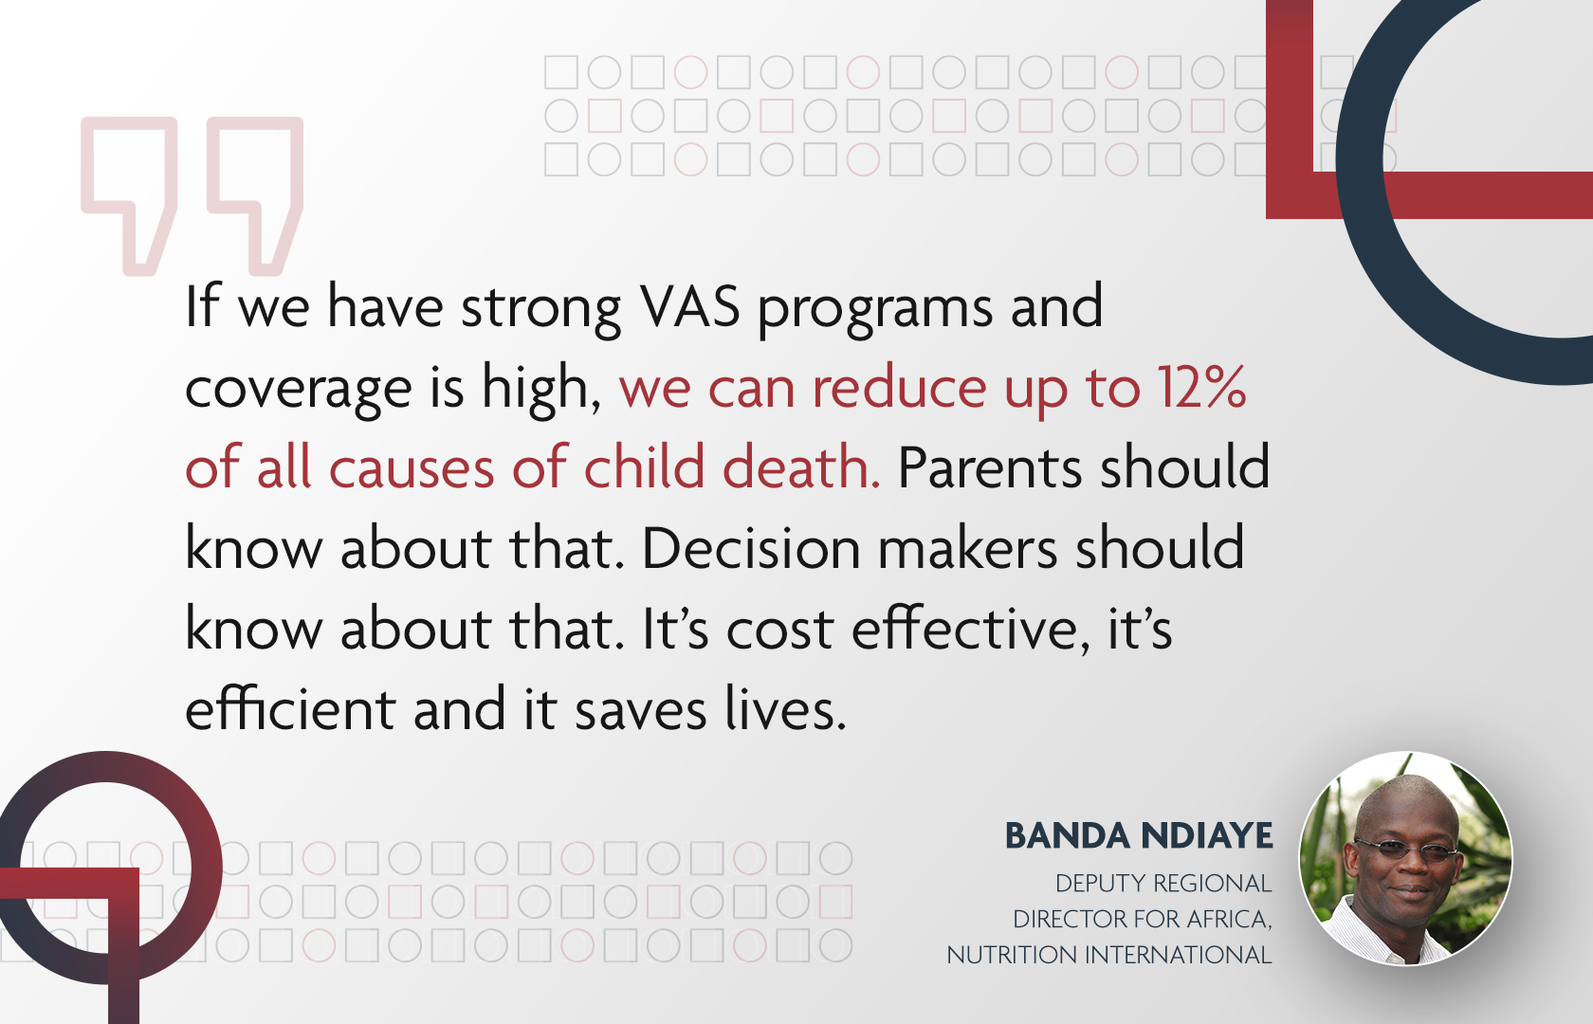 Text of a quote: "If we have strong VAS programs and coverage is high, we can reduce up to 12 per cent of all causes of child death. Parents should know about that. Decision makers should know about that. It’s cost effective, it’s efficient and it saves lives." from Banda Ndiaye, Deputy Regional Director for Africa, Nutrition International